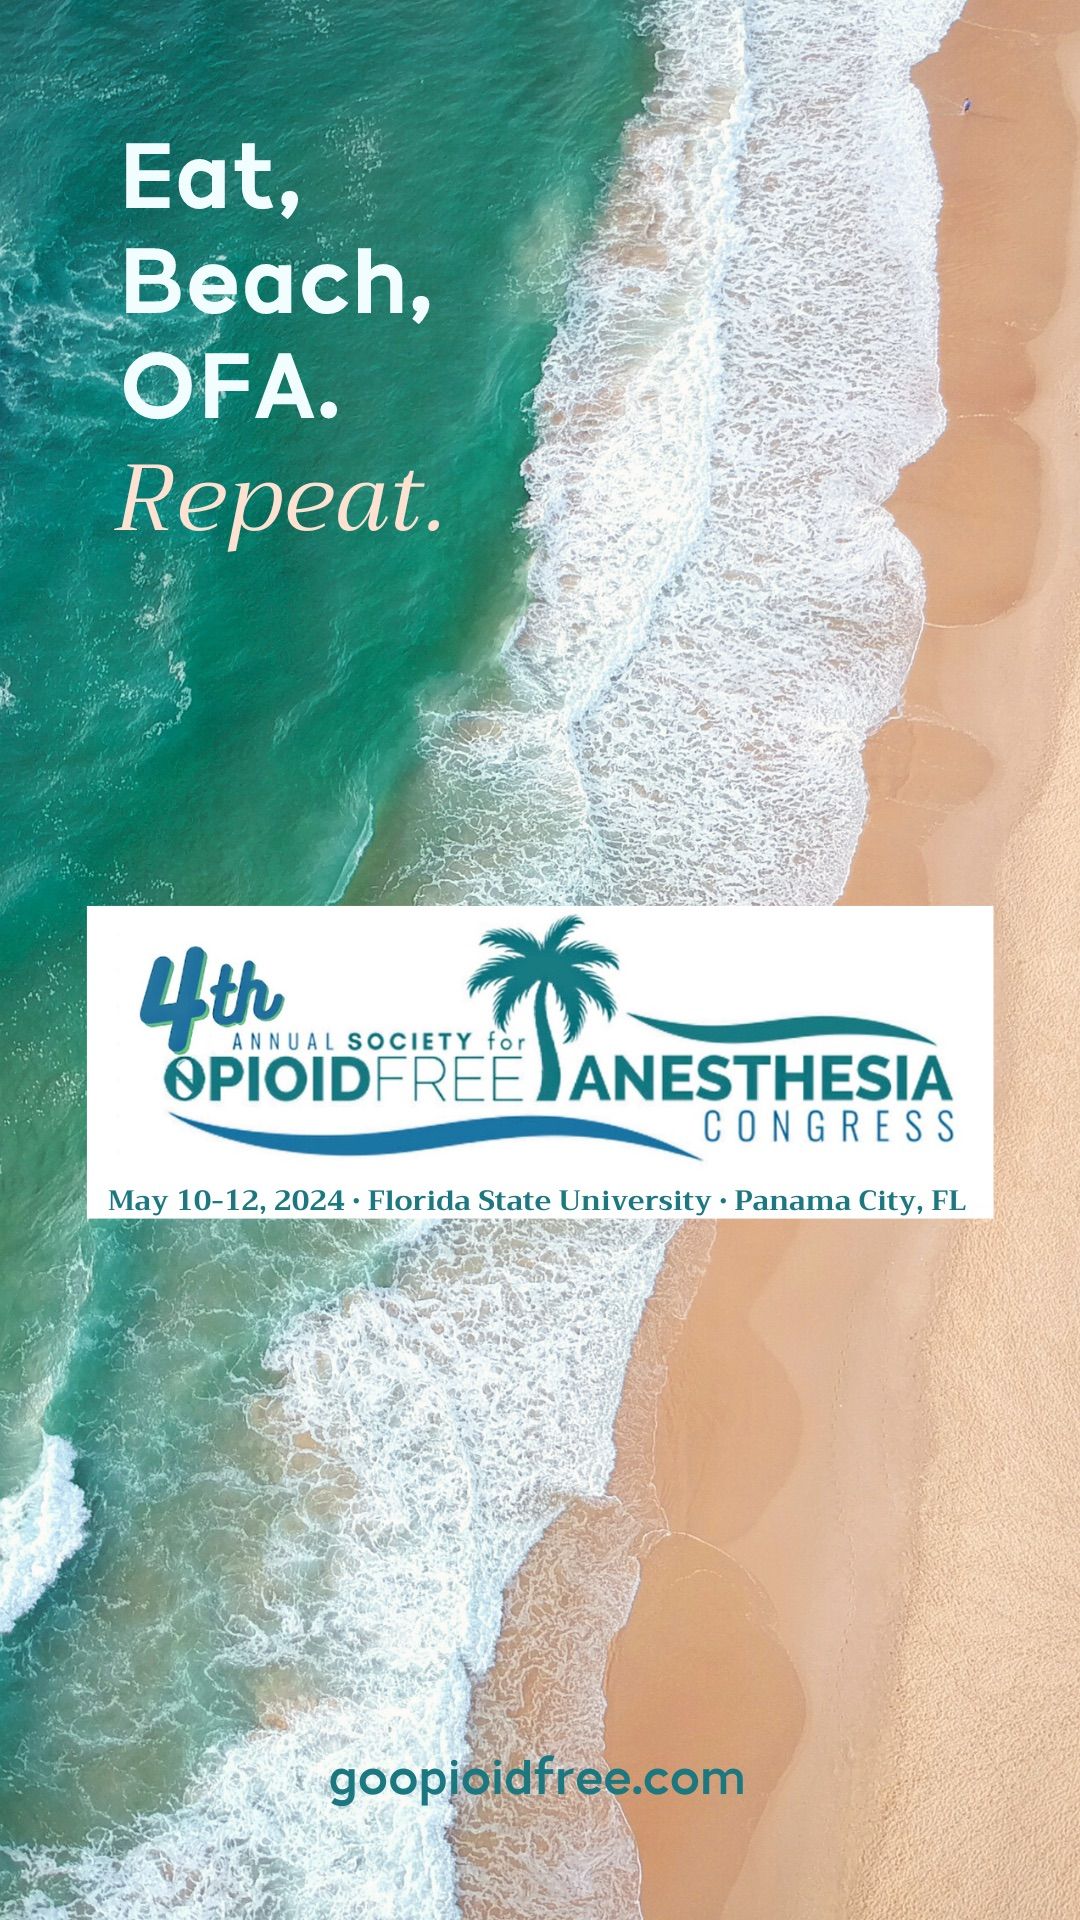 4th Annual Society for Opioid-Free Anesthesia Congress